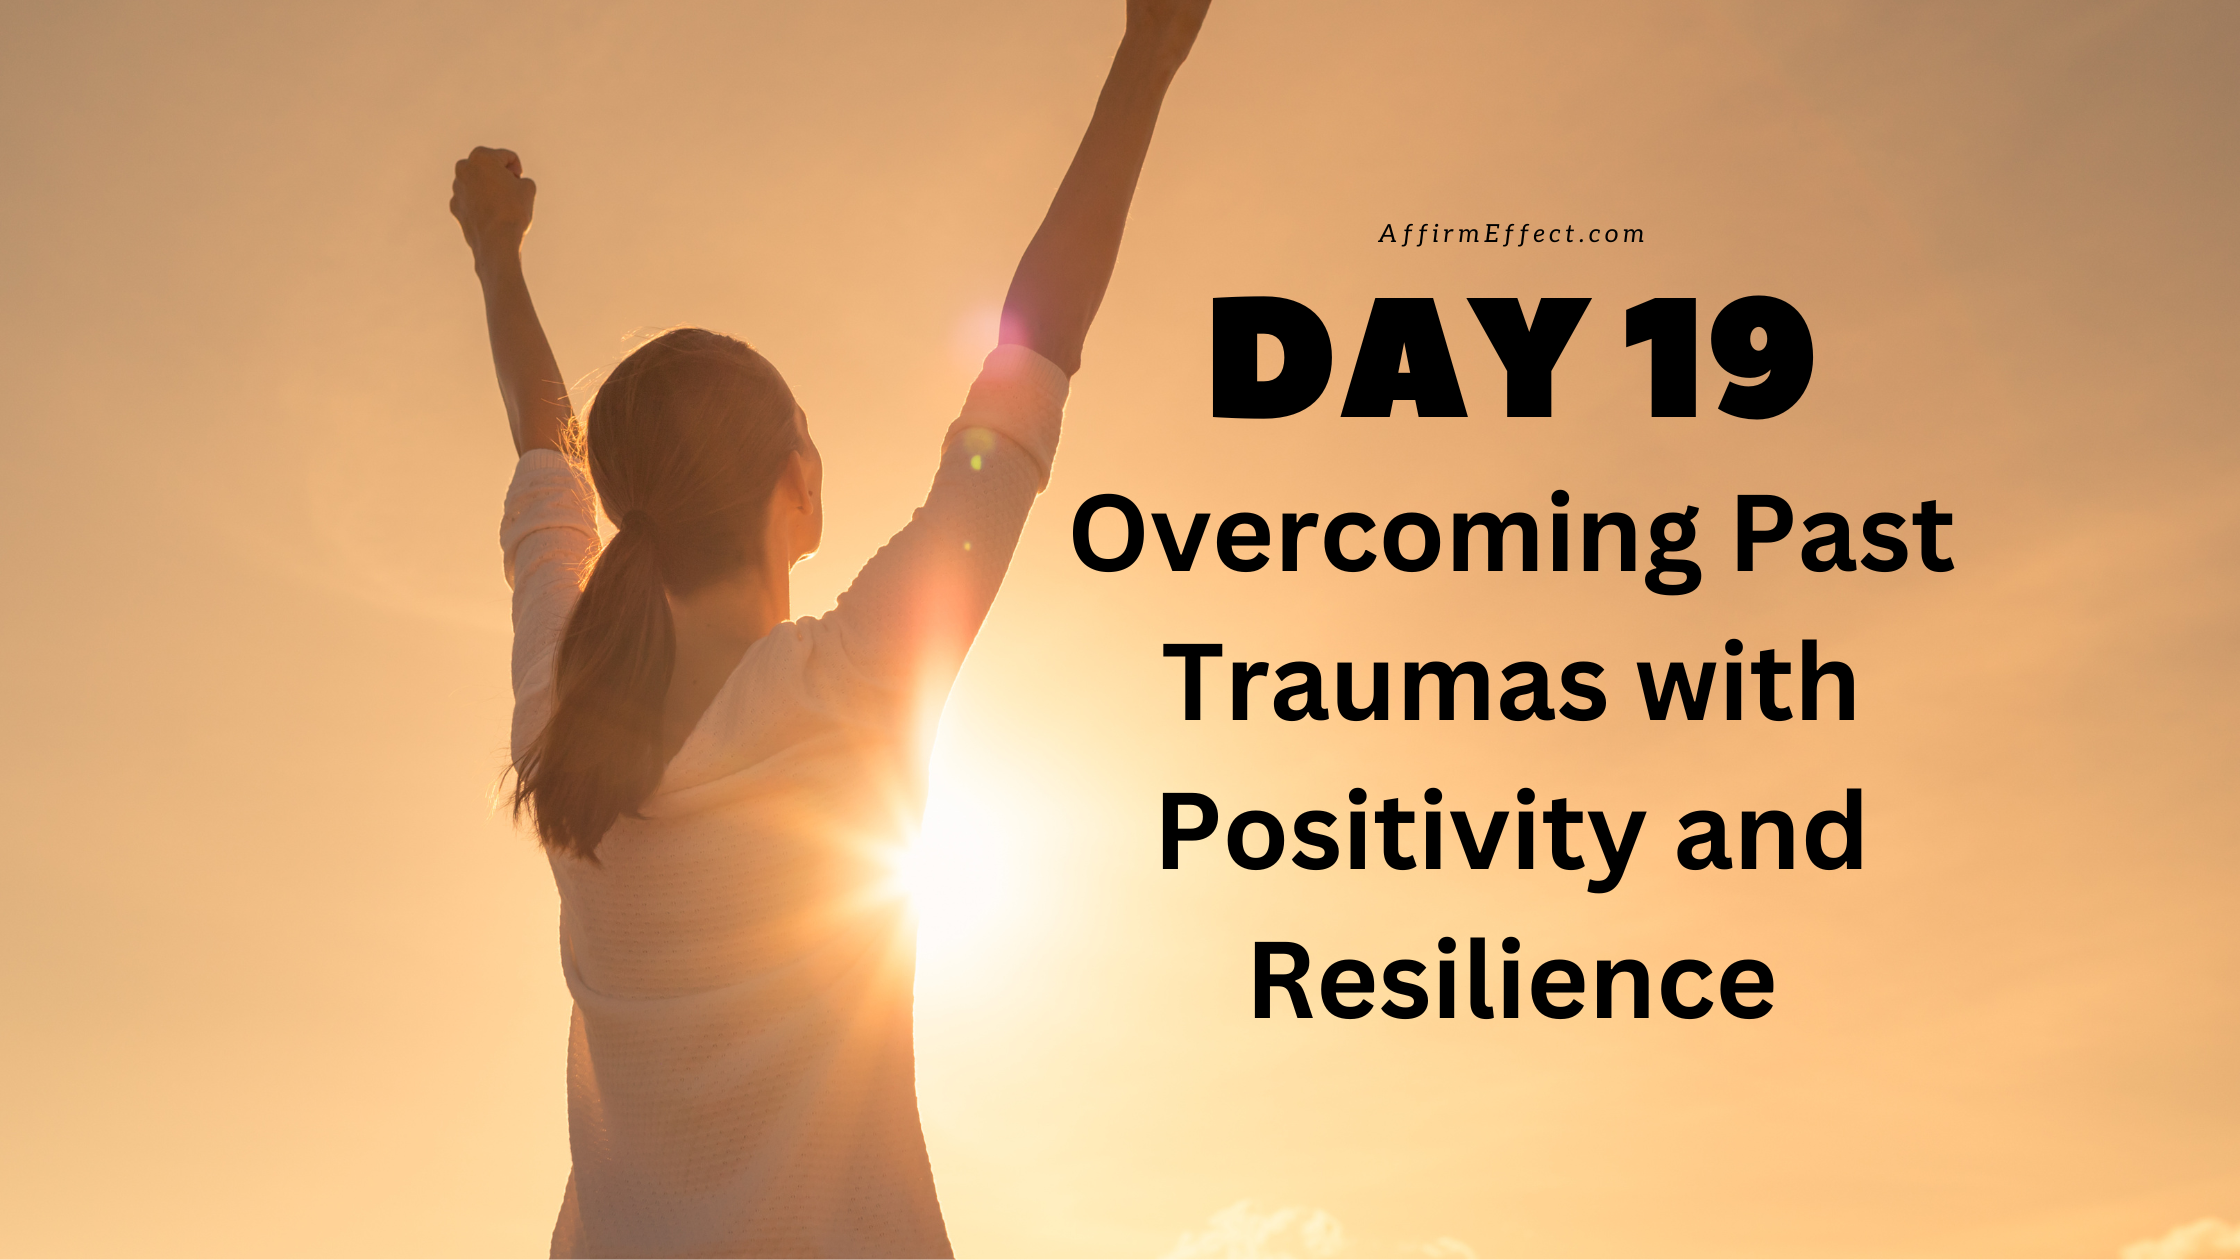 Day 19: Overcoming Past Traumas with Positivity and Resilience